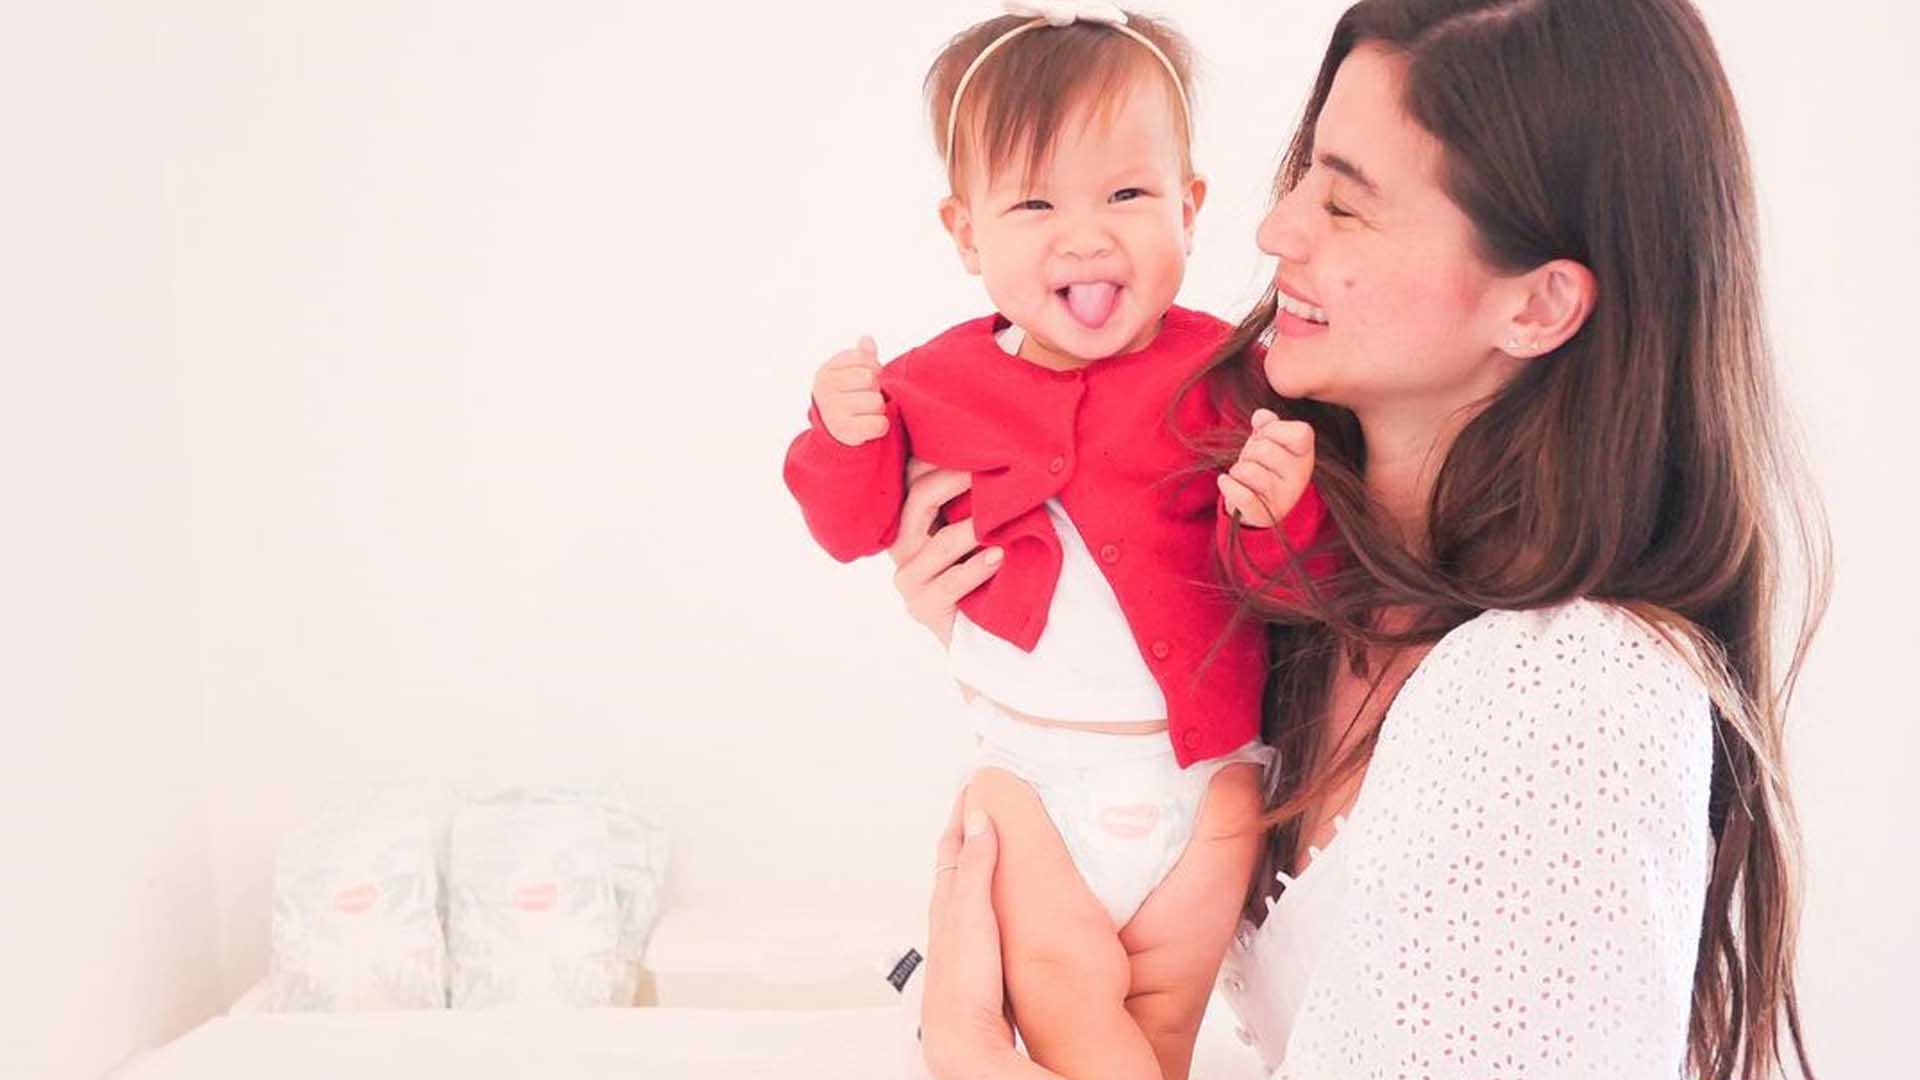 Celebrate The Season Of Giving This Christmas With Huggies, Anne Curtis ...